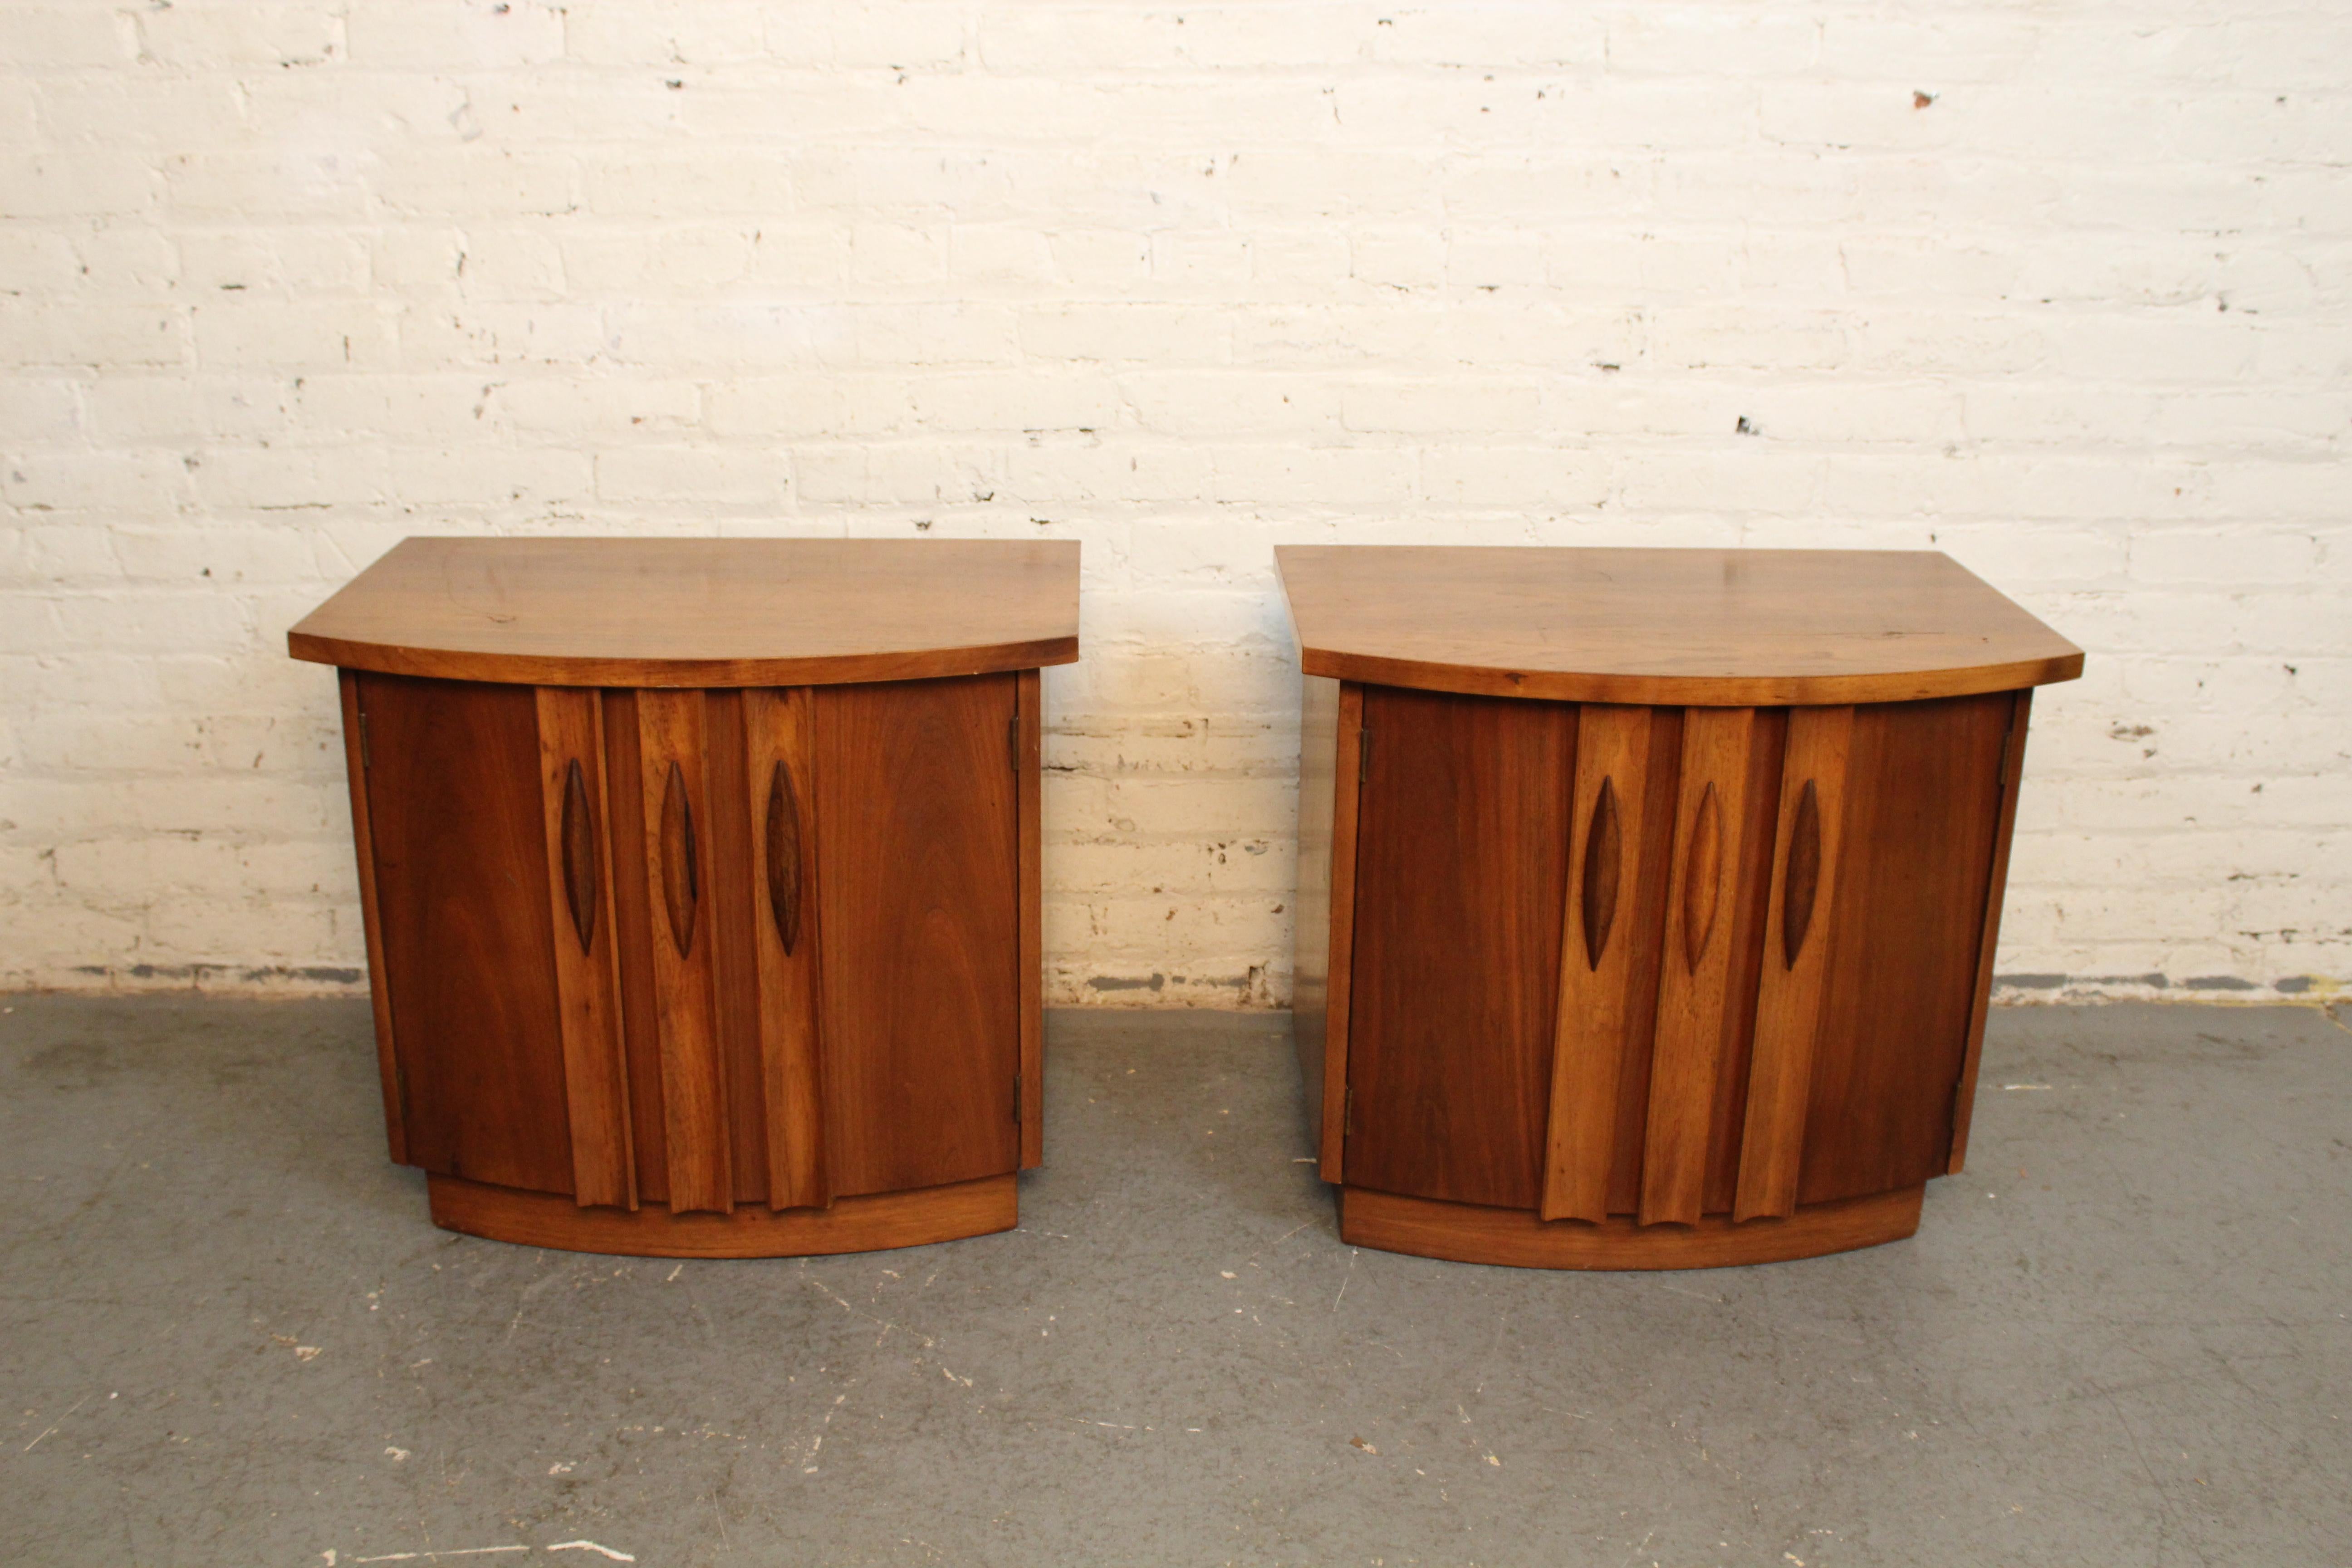 Fantastic pair of American mid-century vintage nightstands designed and built by Thomasville Furniture of Thomasville, North Carolina! Featuring charming sculptural walnut diamond pulls with contrasting oak trim, the double doors open to reveal a